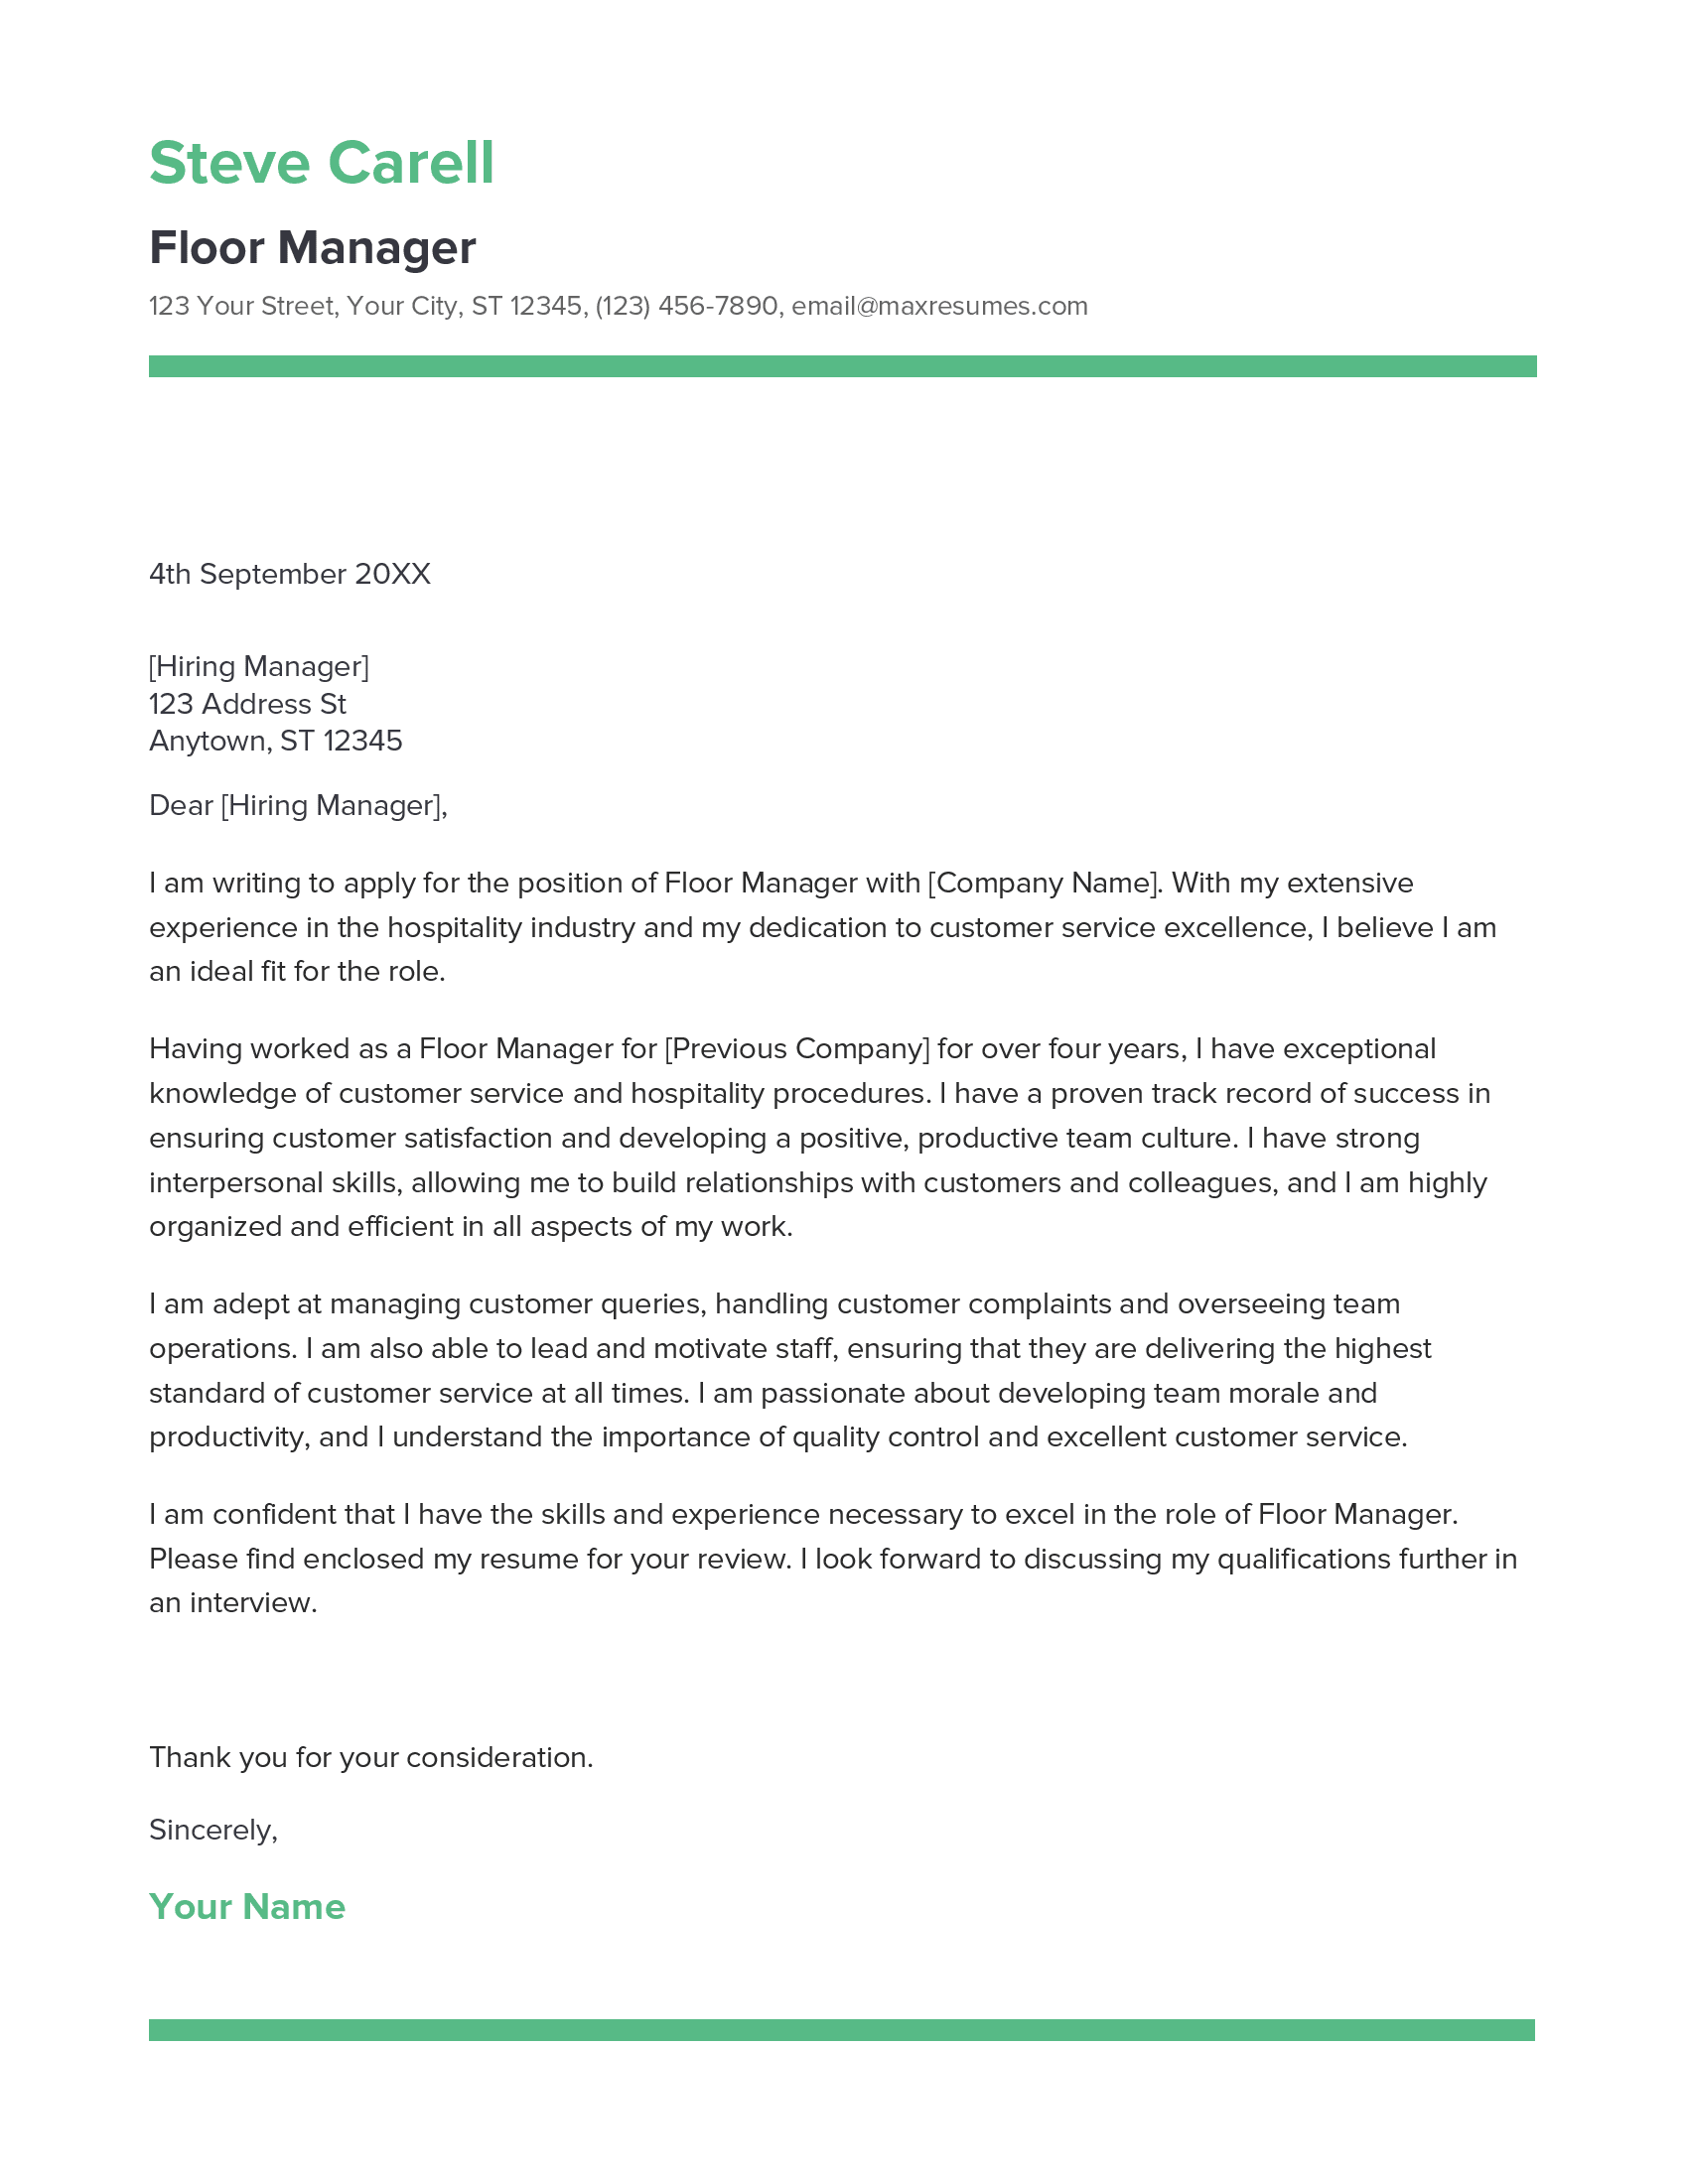 Floor Manager Cover Letter Example